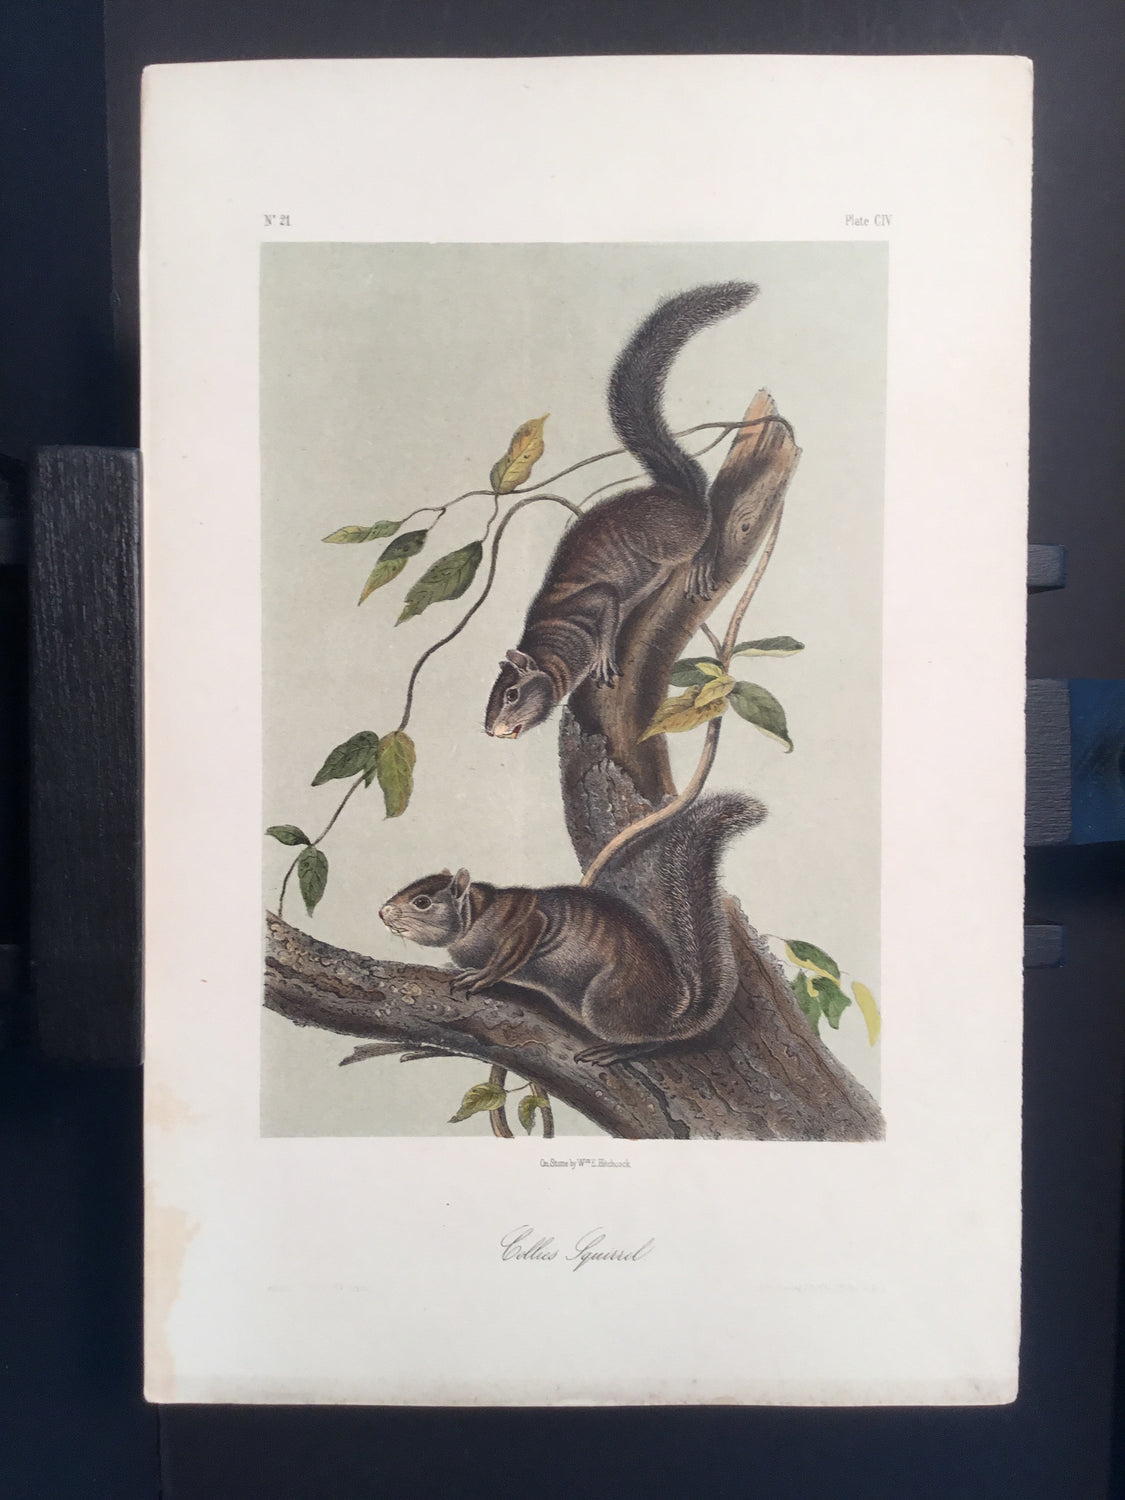 Lord-Hopkins Collection - Collies Squirrels